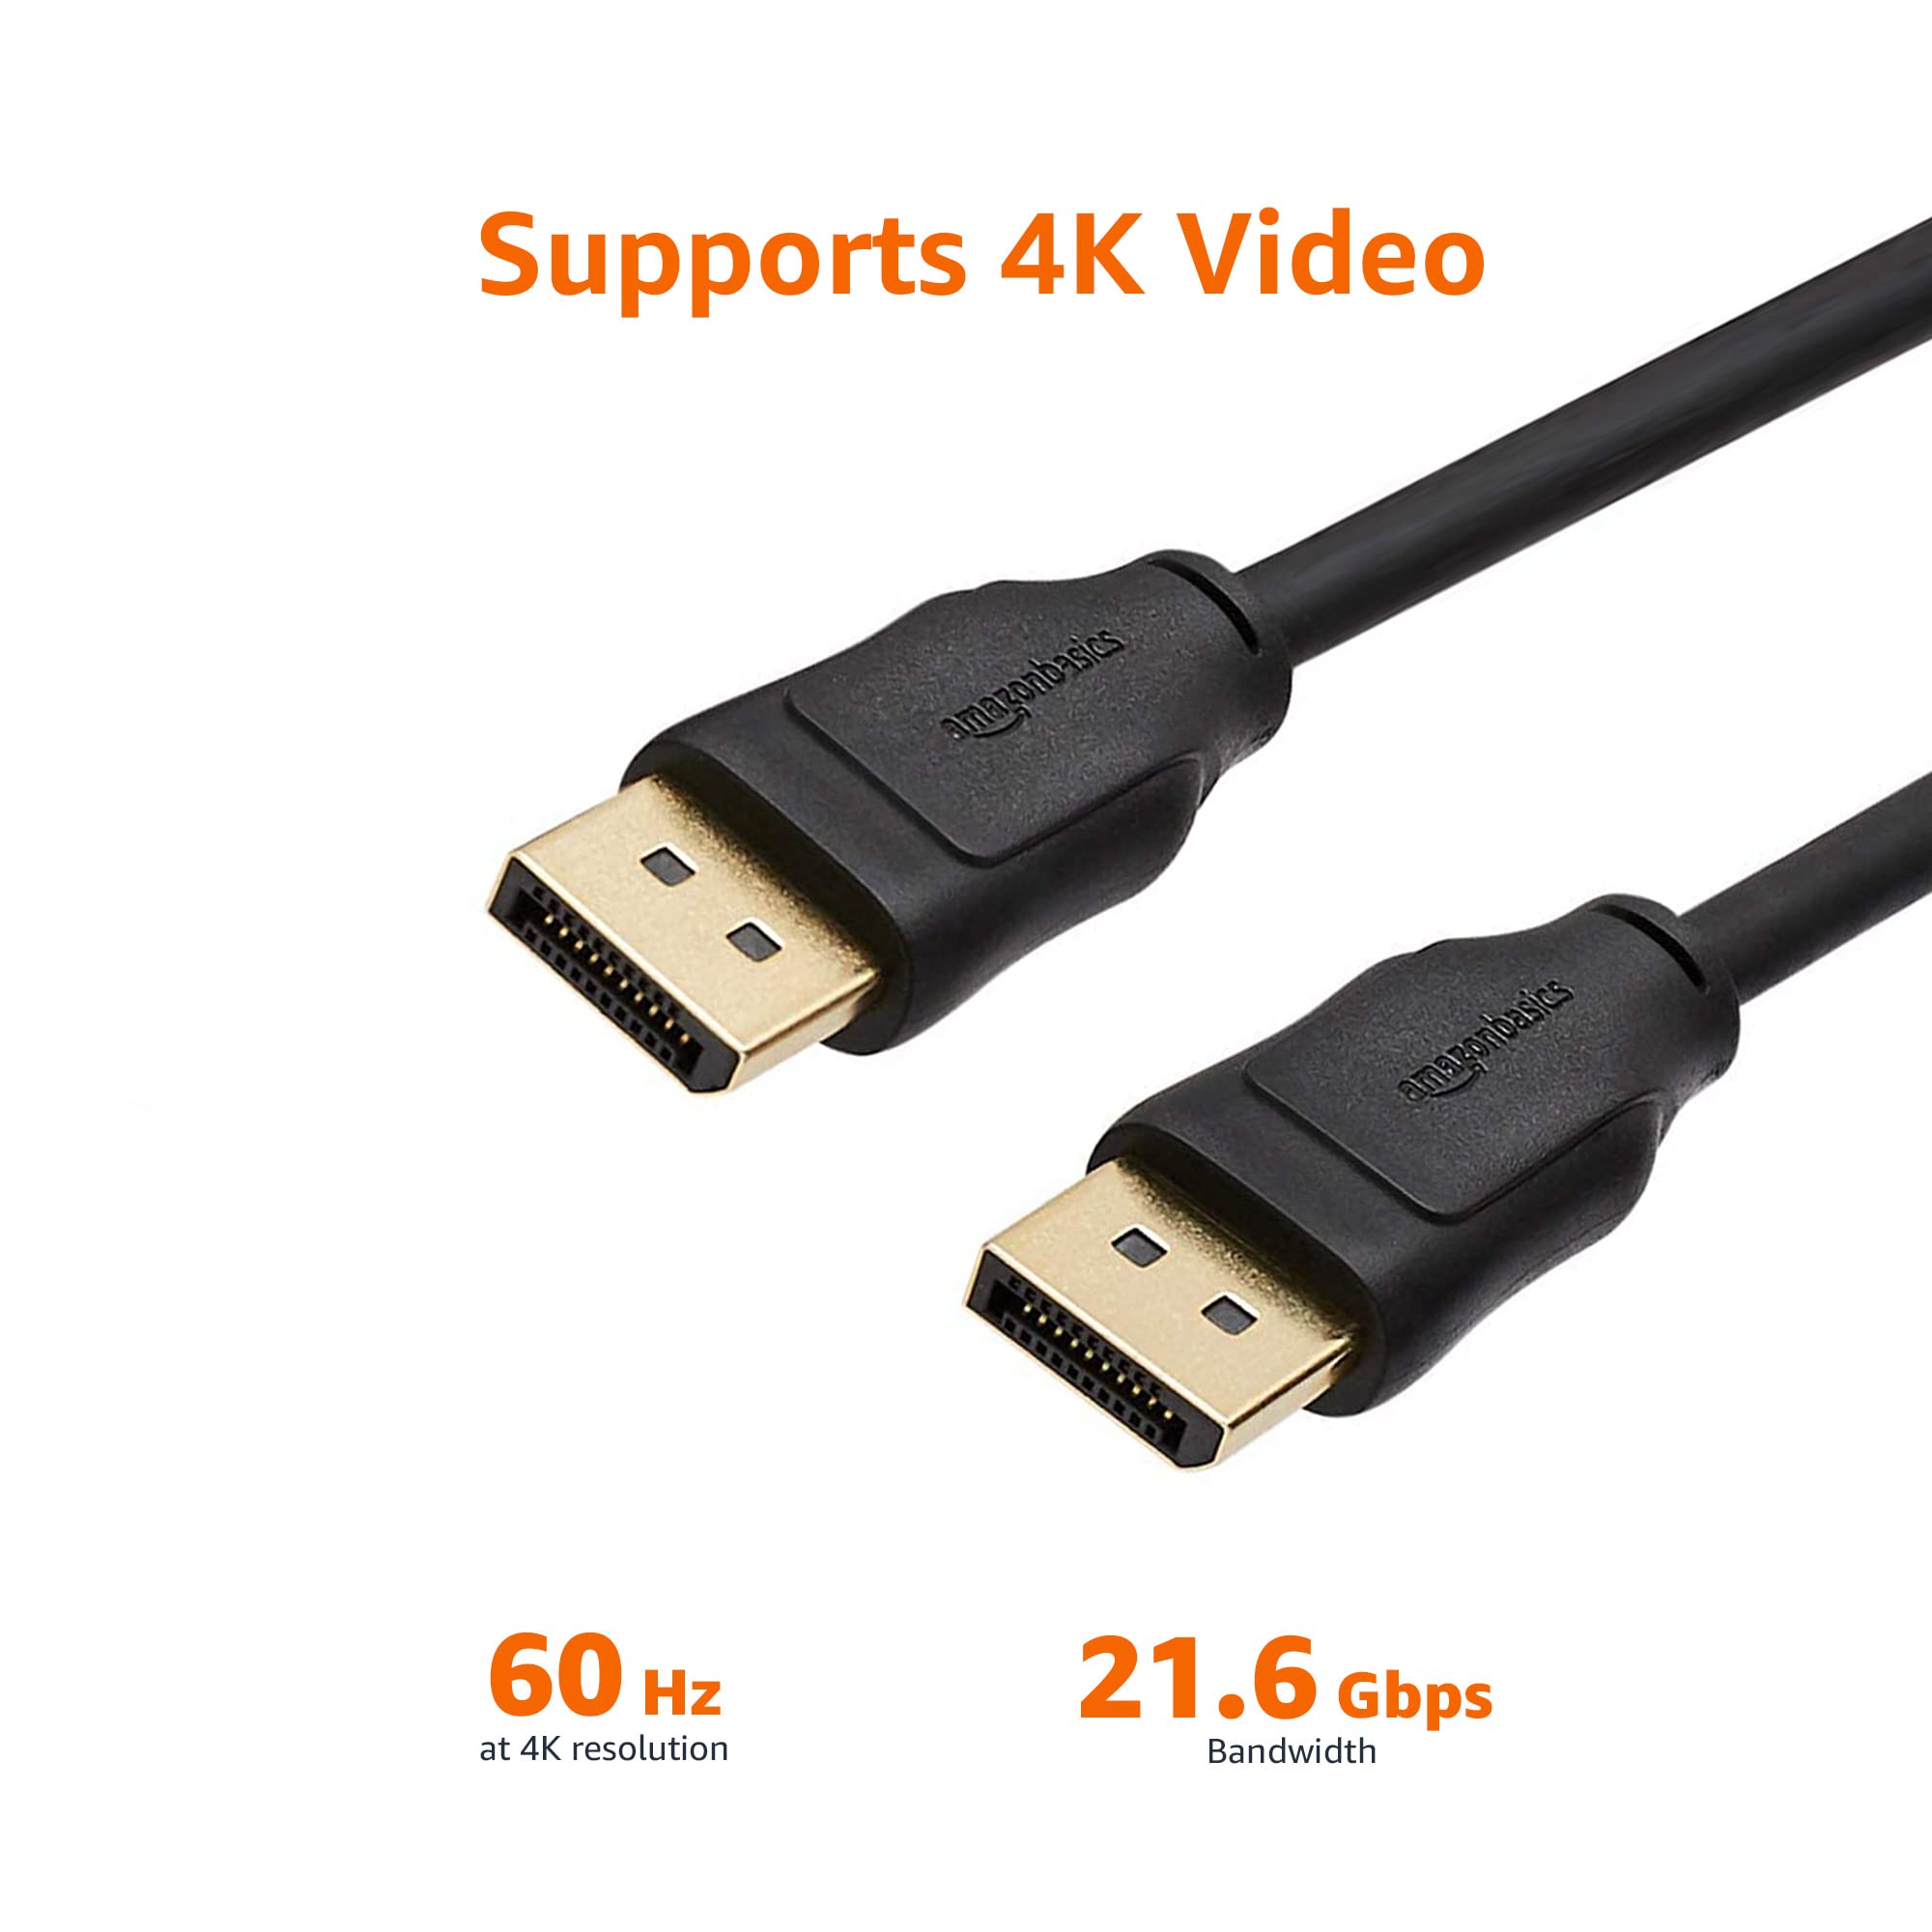 Amazon Basics DisplayPort 1.2 Cable, 21.6Gbps High-Speed, 4K@60Hz, 2K@165Hz, Gold-Plated Plugs, 6 Foot, Black